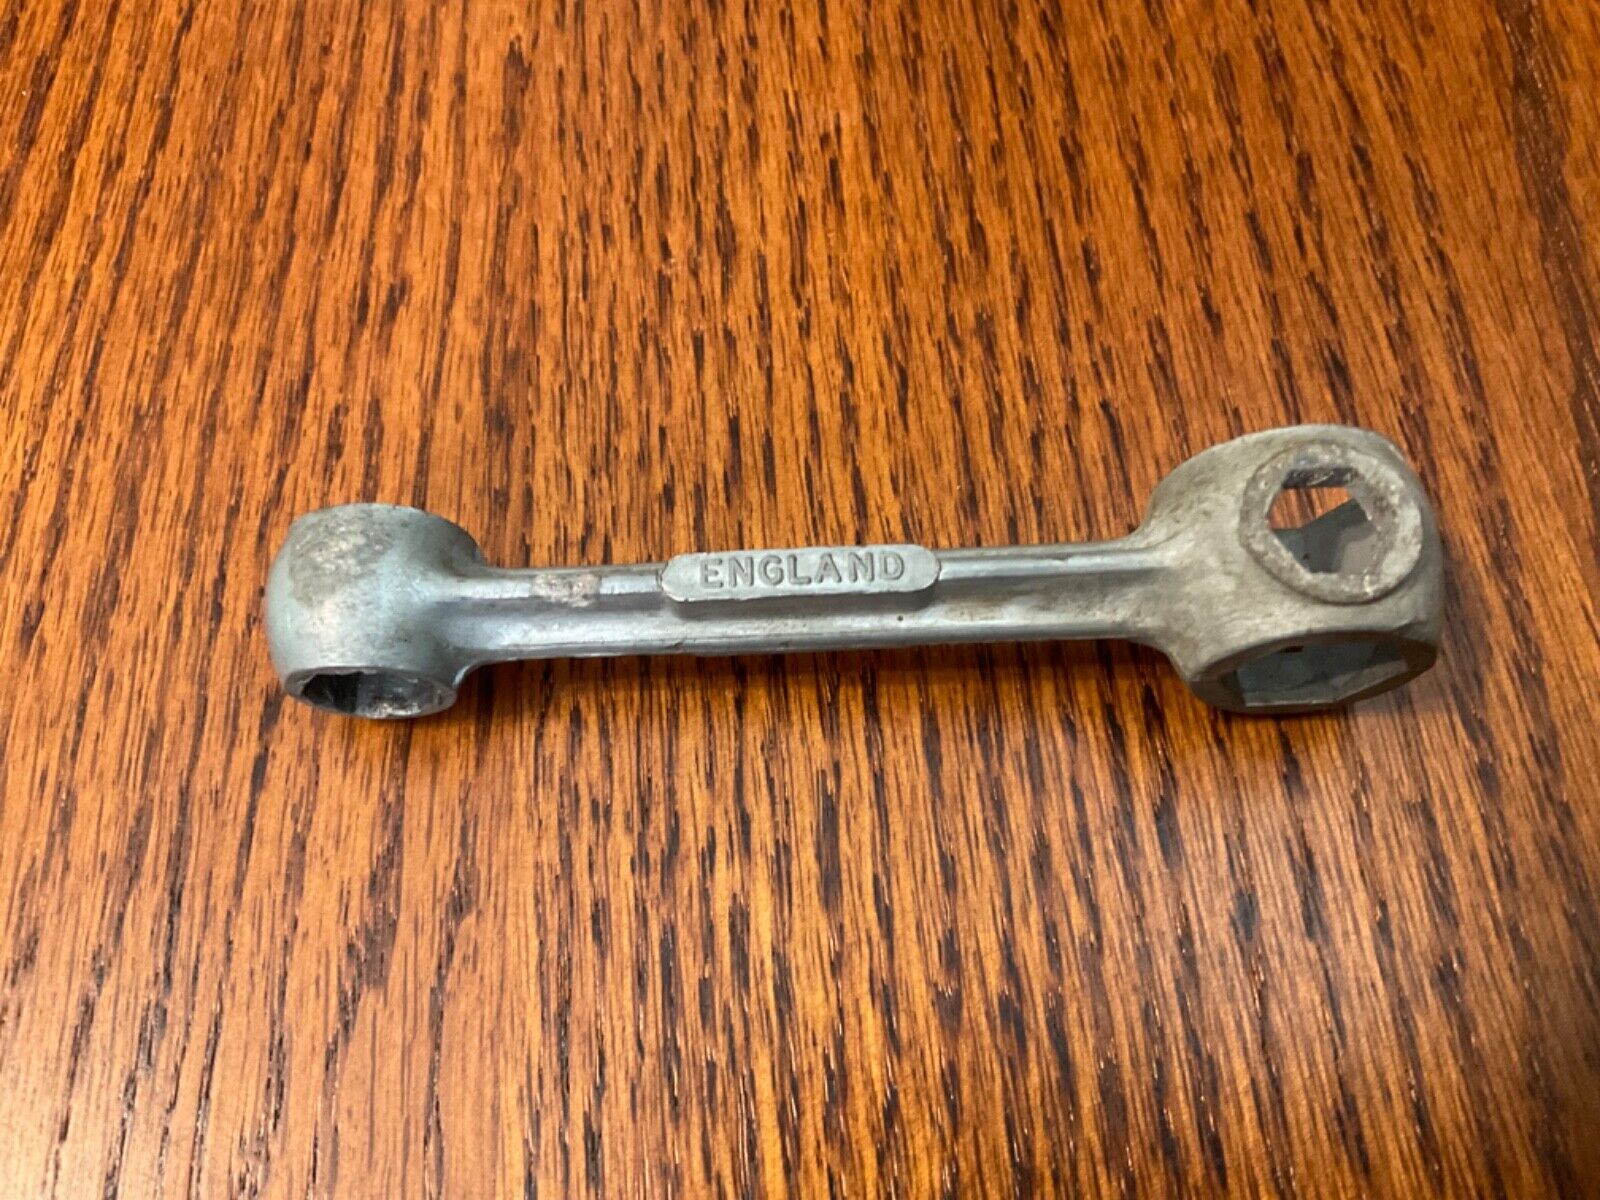 Vintage dog bone bicycle wrench 6 way Made in England 4 inch 6 point